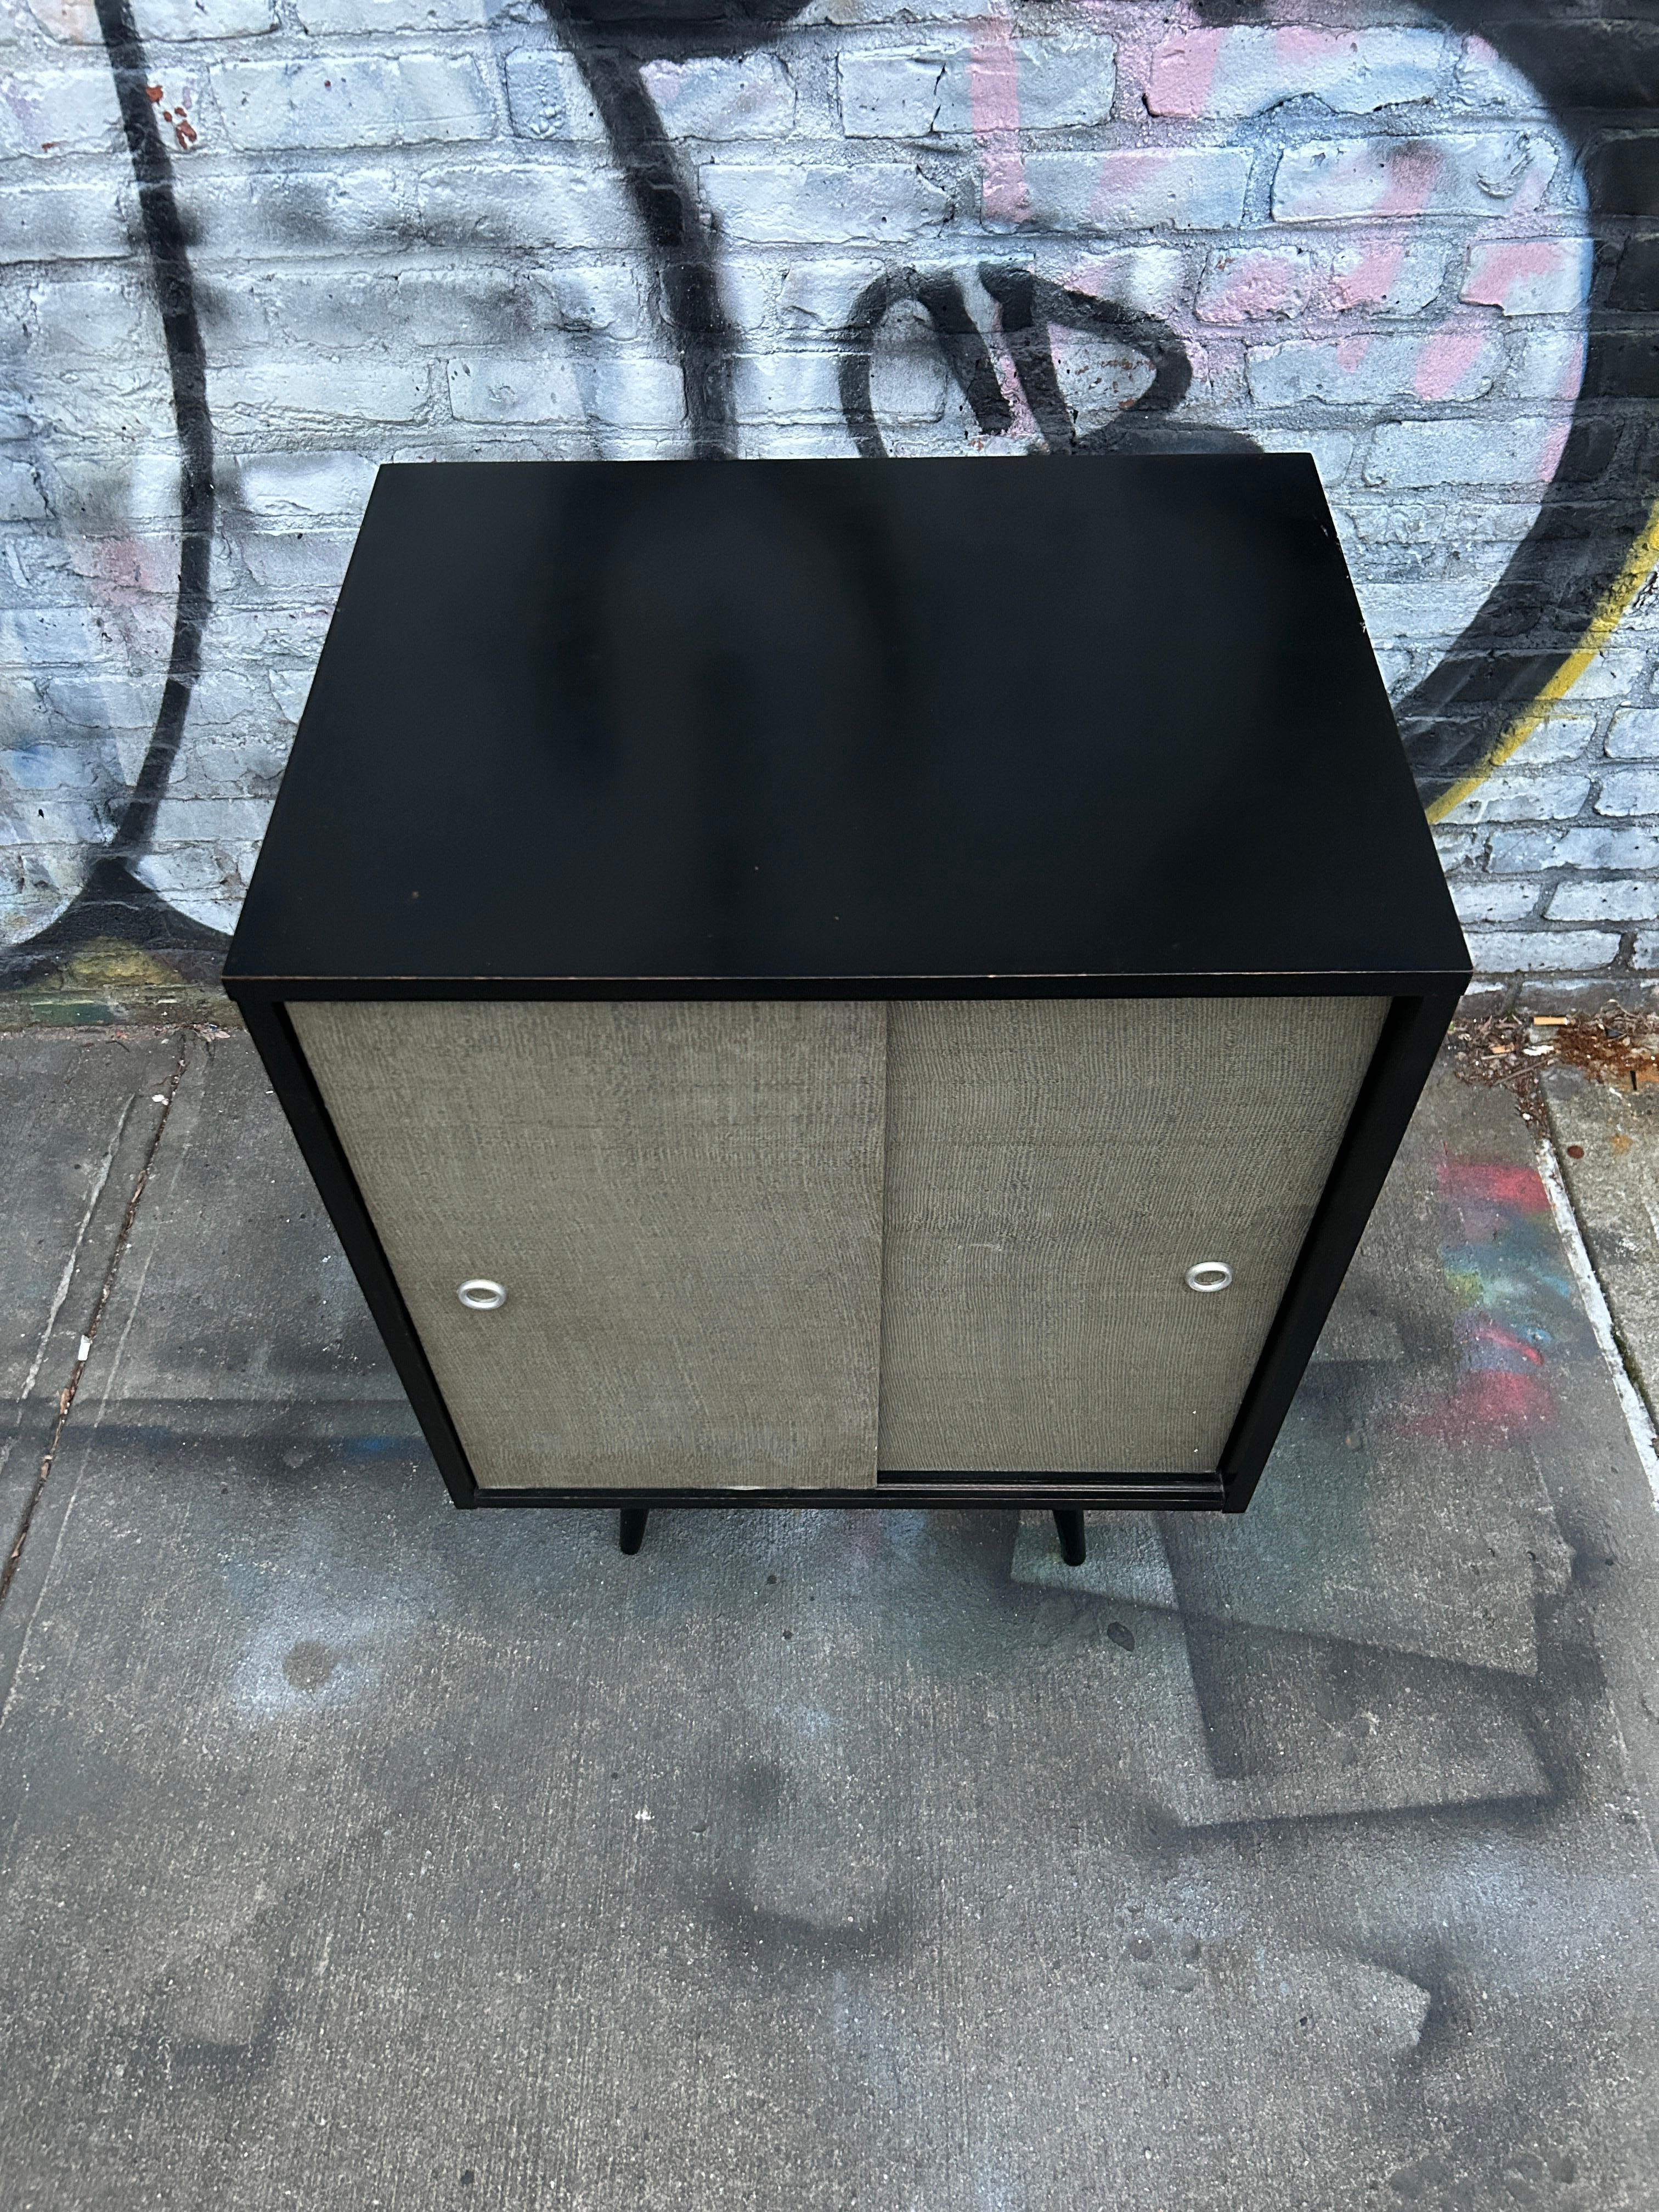 Mid-Century Modern Mid-Century Small Cabinet by Paul McCobb circa 1950 Planner Group #1512 Black For Sale